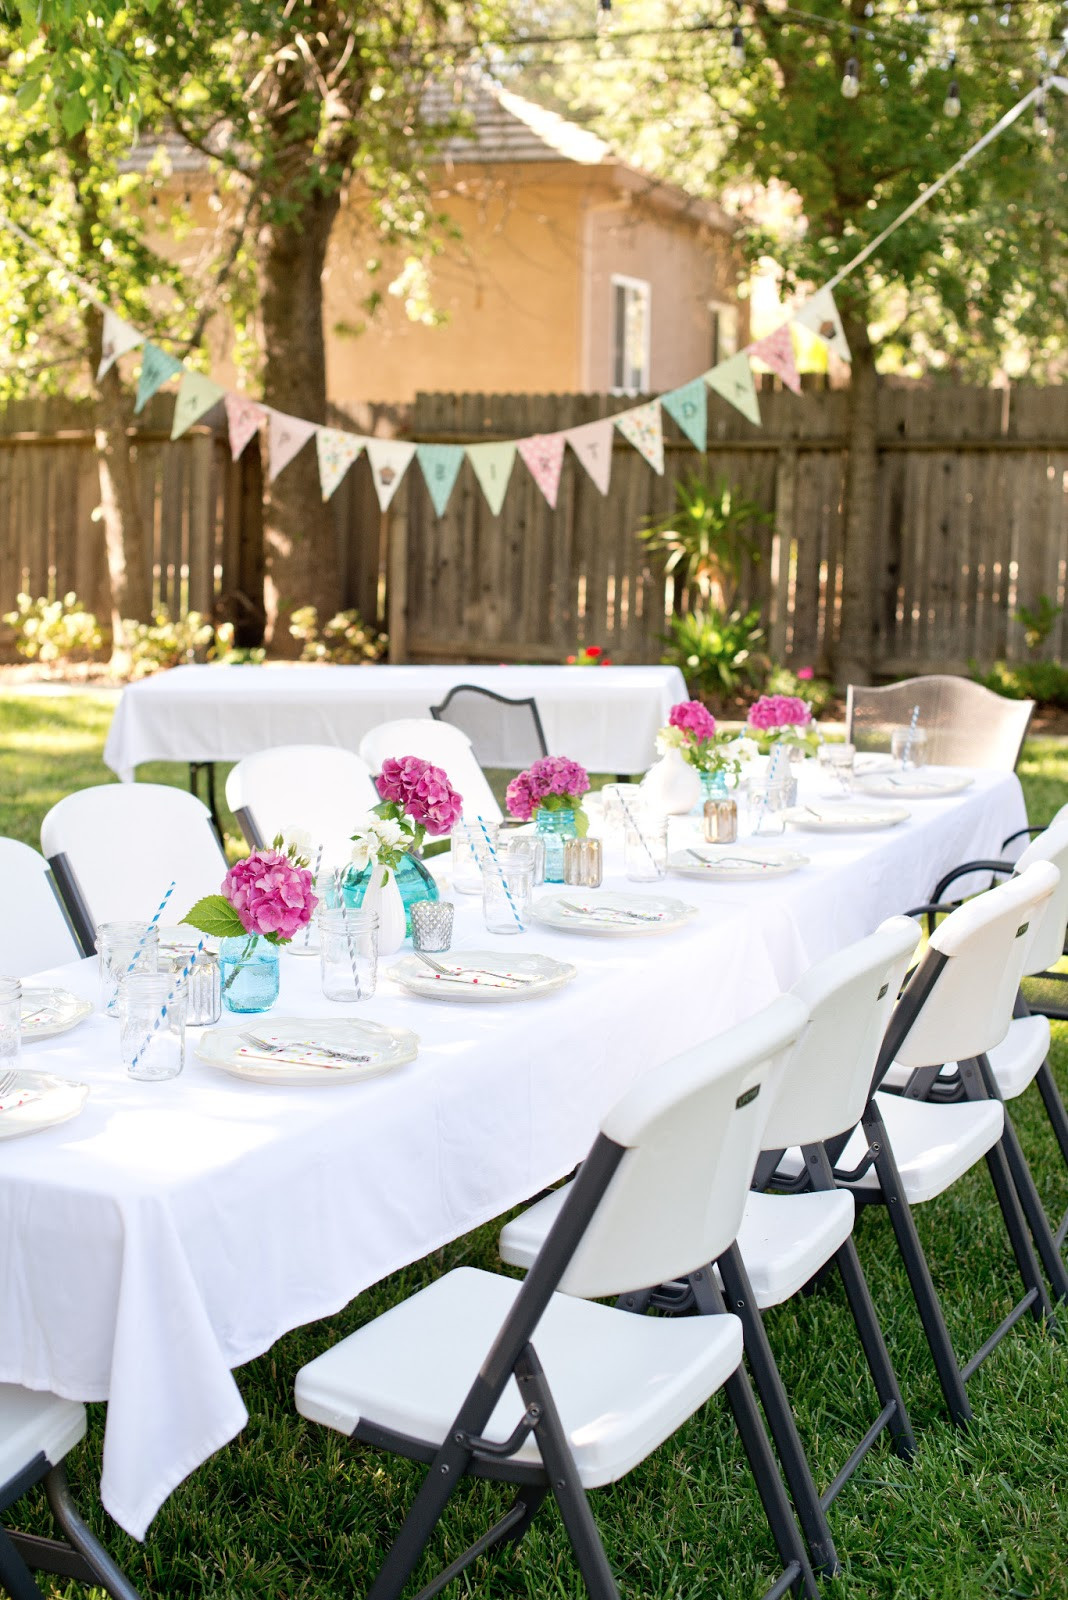 Backyard Dinner Party Decorating Ideas
 Backyard Party Decorations For Unfor table Moments